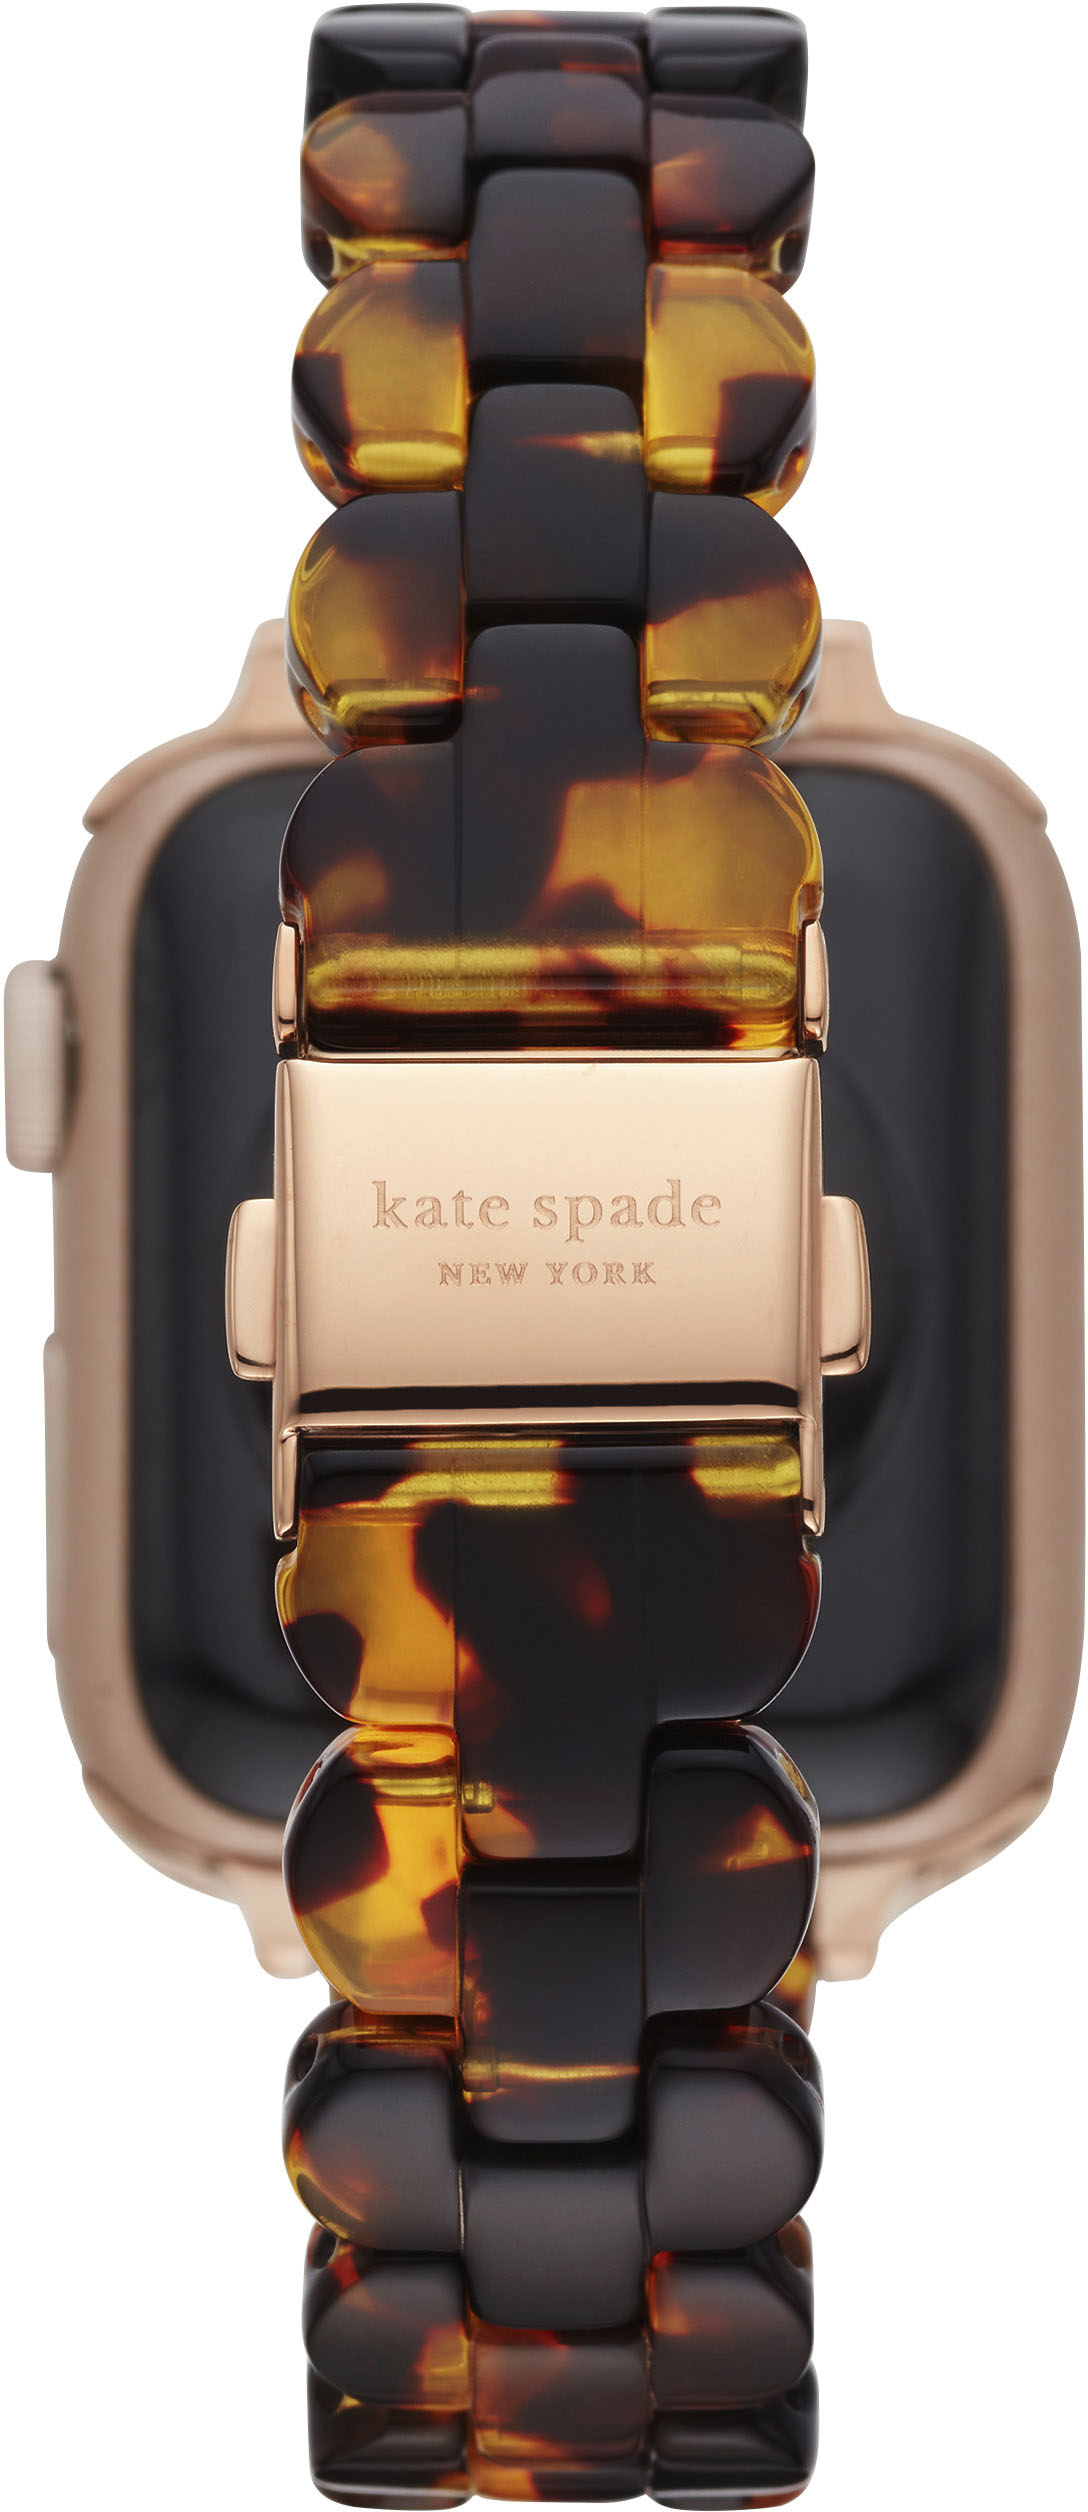 Left View: kate spade new york - Wrap Hard shell Case for Apple® iPhone® 12 & iPhone® 12 Pro